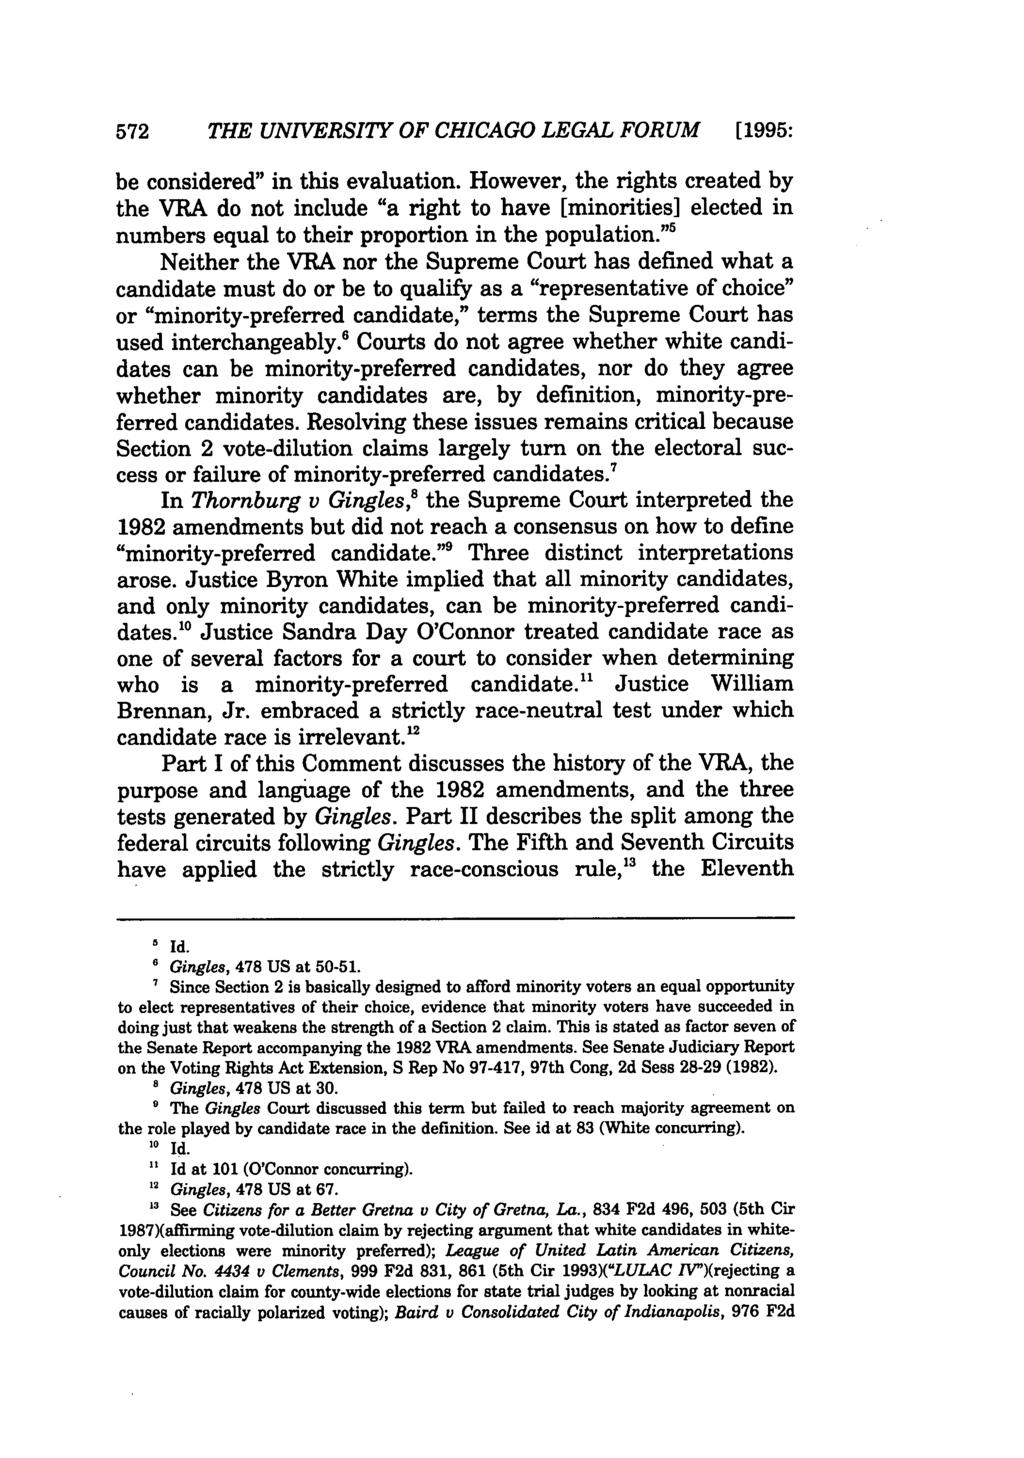 572 THE UNIVERSITY OF CHICAGO LEGAL FORUM [1995: be considered" in this evaluation.